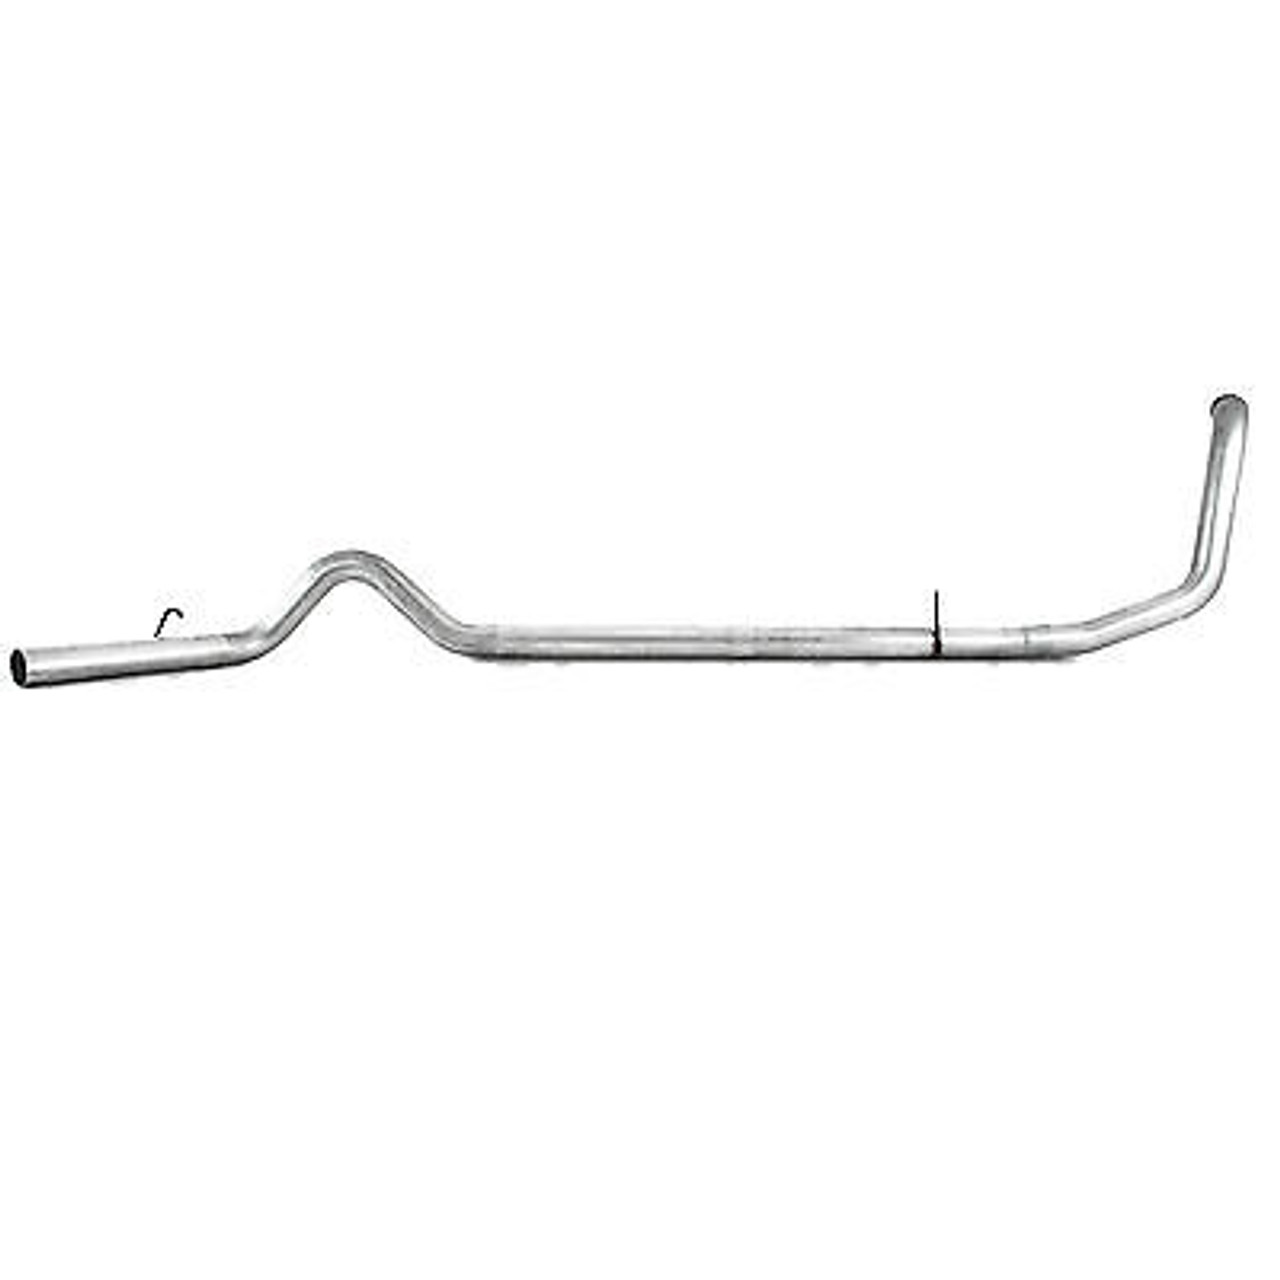 S6200SLM  75-5062 - MBRP 4" TURBO BACK SS NO MUFFLER EXHAUST S&B CAI 99-03 FORD POWERSTROKE DIESEL